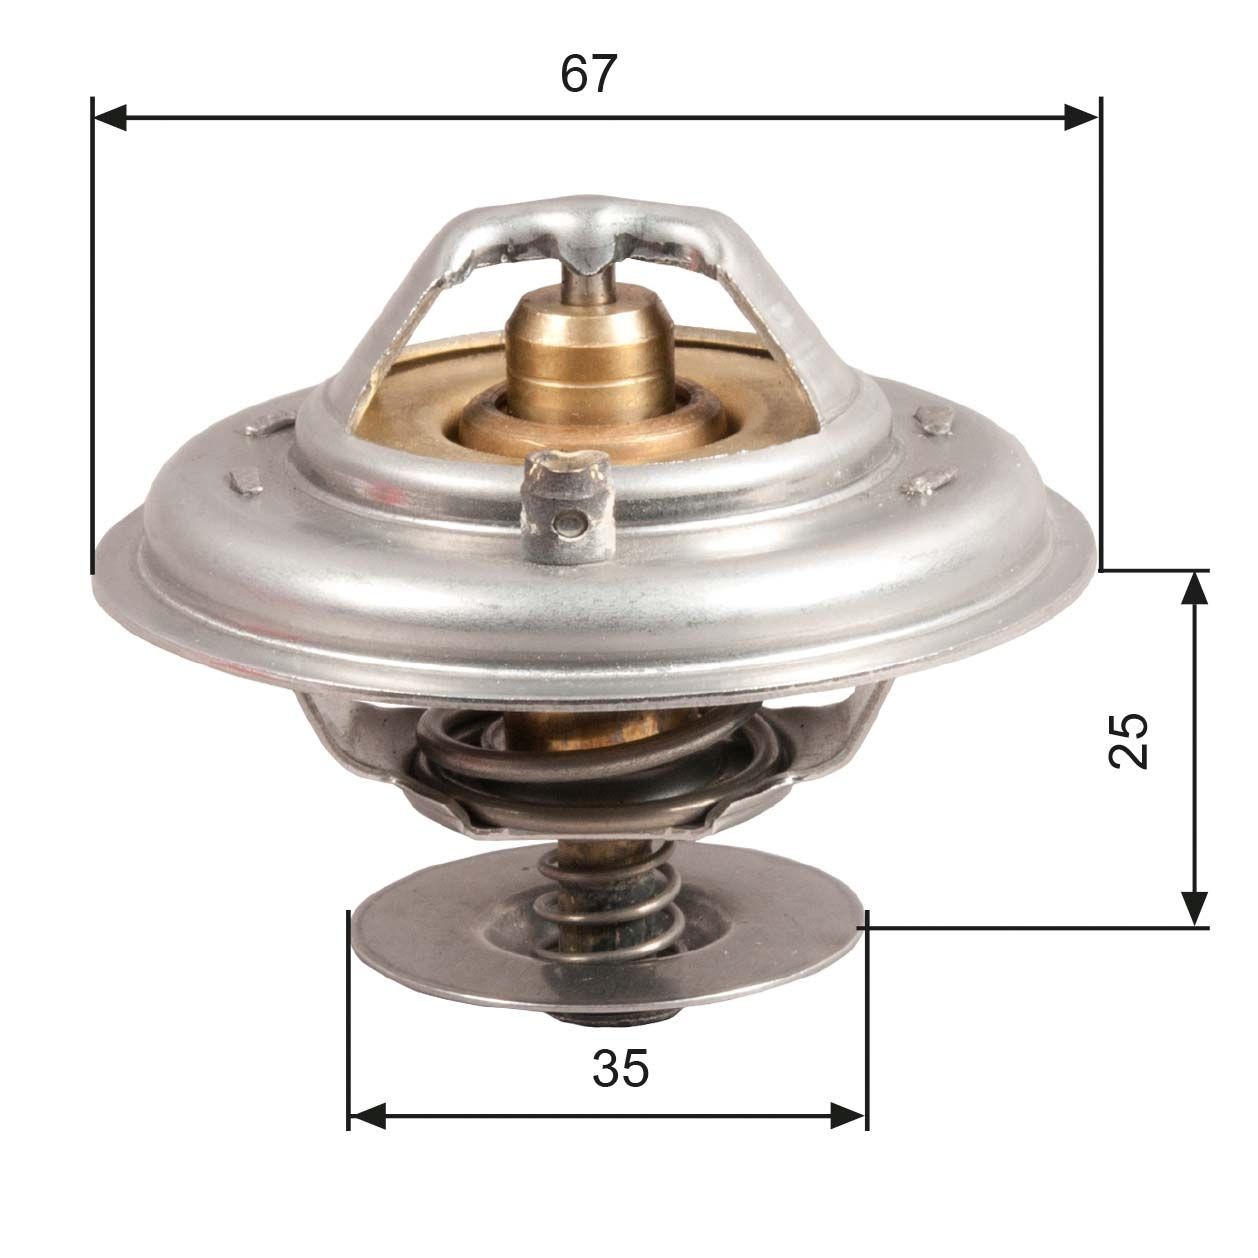 GATES TH14380G1 Engine thermostat Opening Temperature: 80°C, with gaskets/seals, without housing